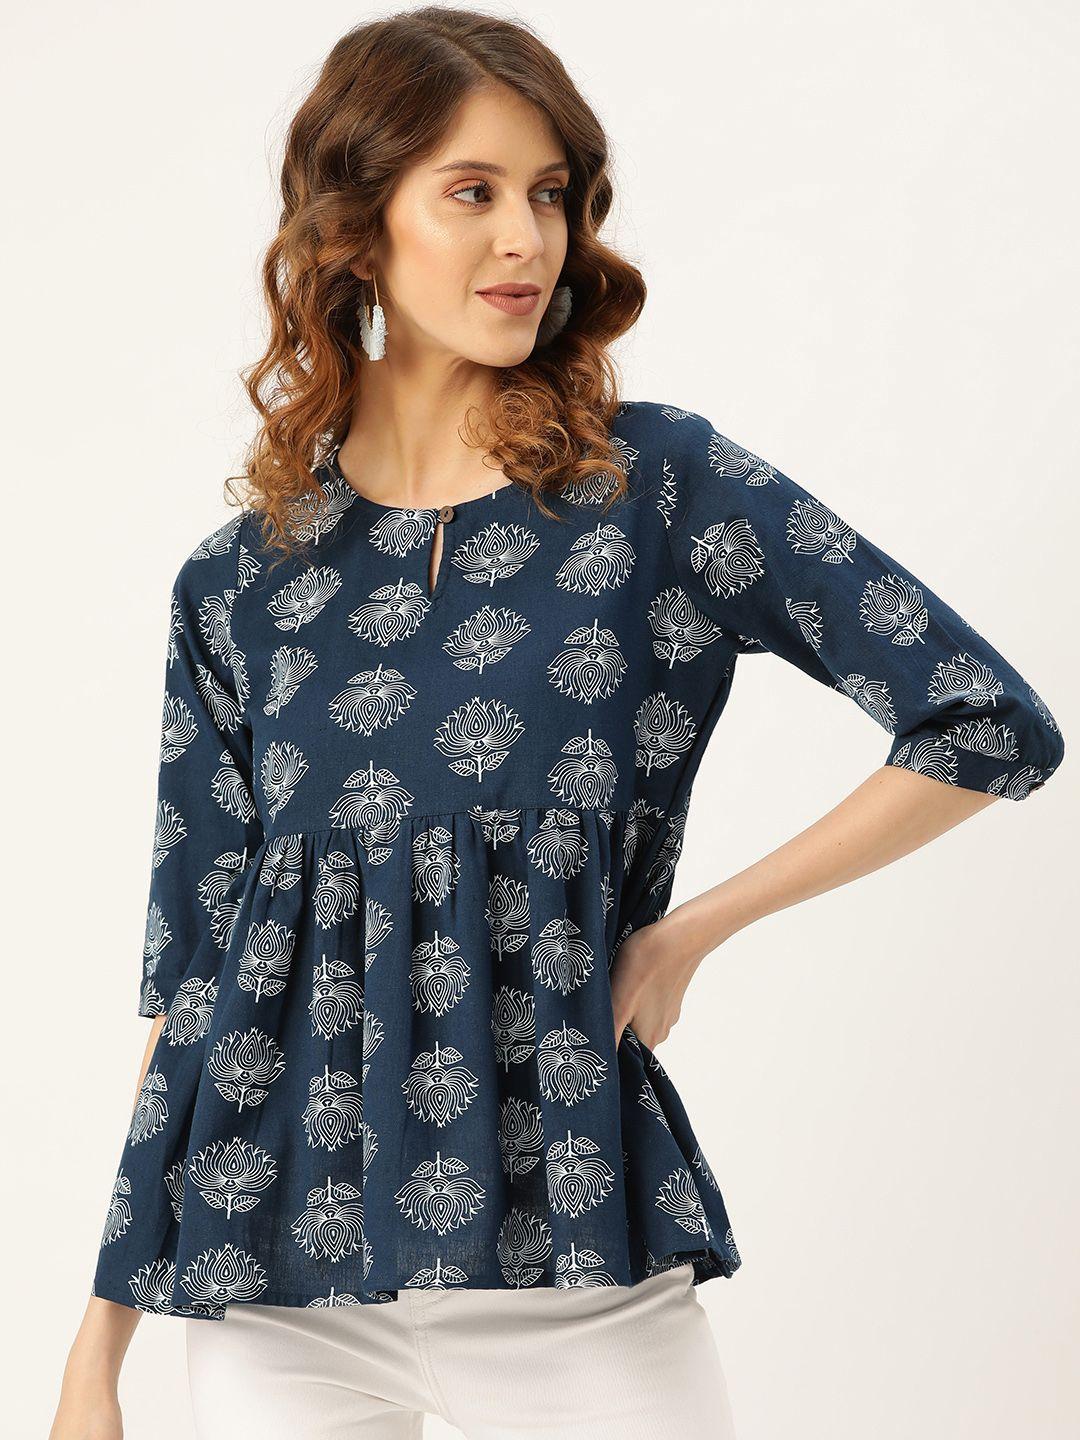 shae-by-sassafras-women-navy-blue-&-white-lotus-printed-a-line-pure-cotton-top